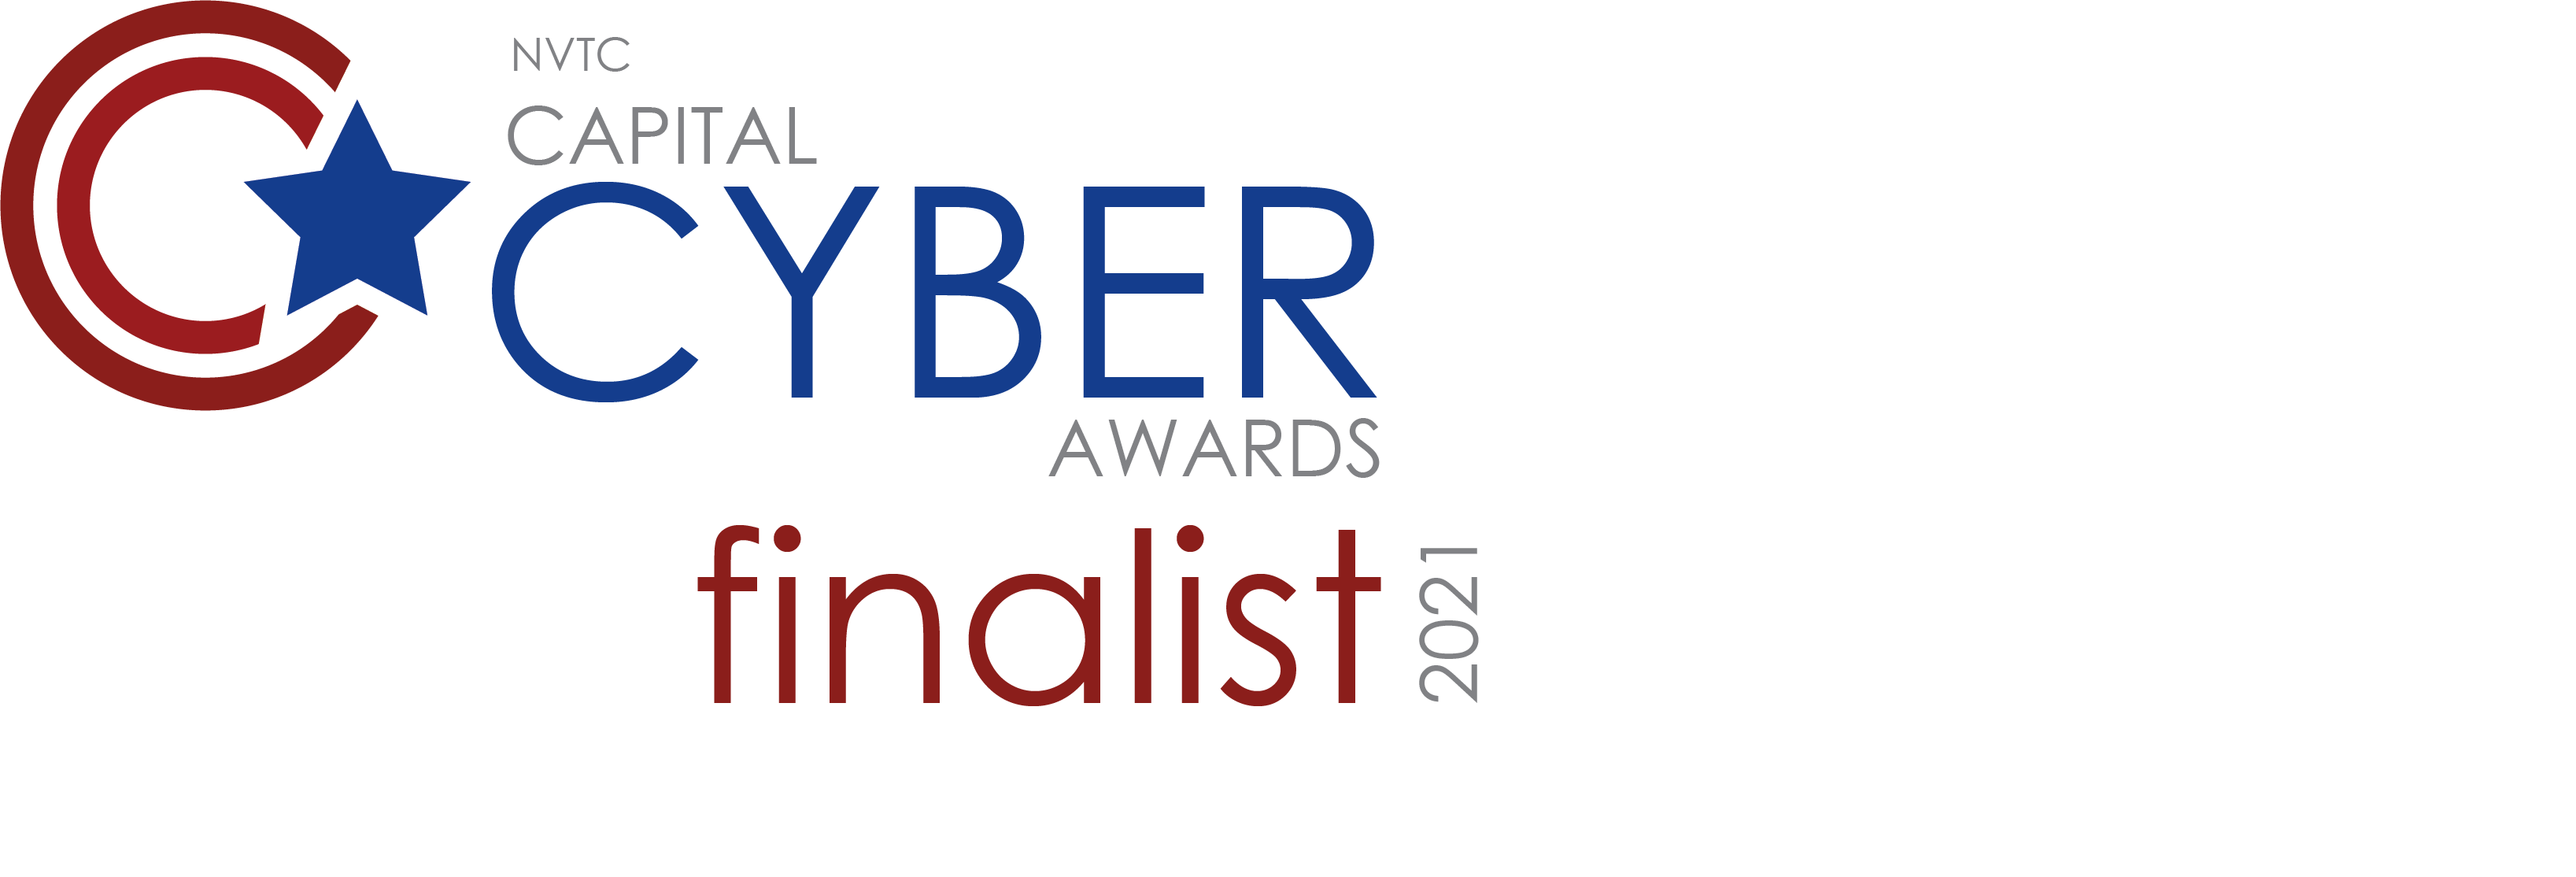 Cynalytica selected as finalist in NVTC Capital Cyber Awards